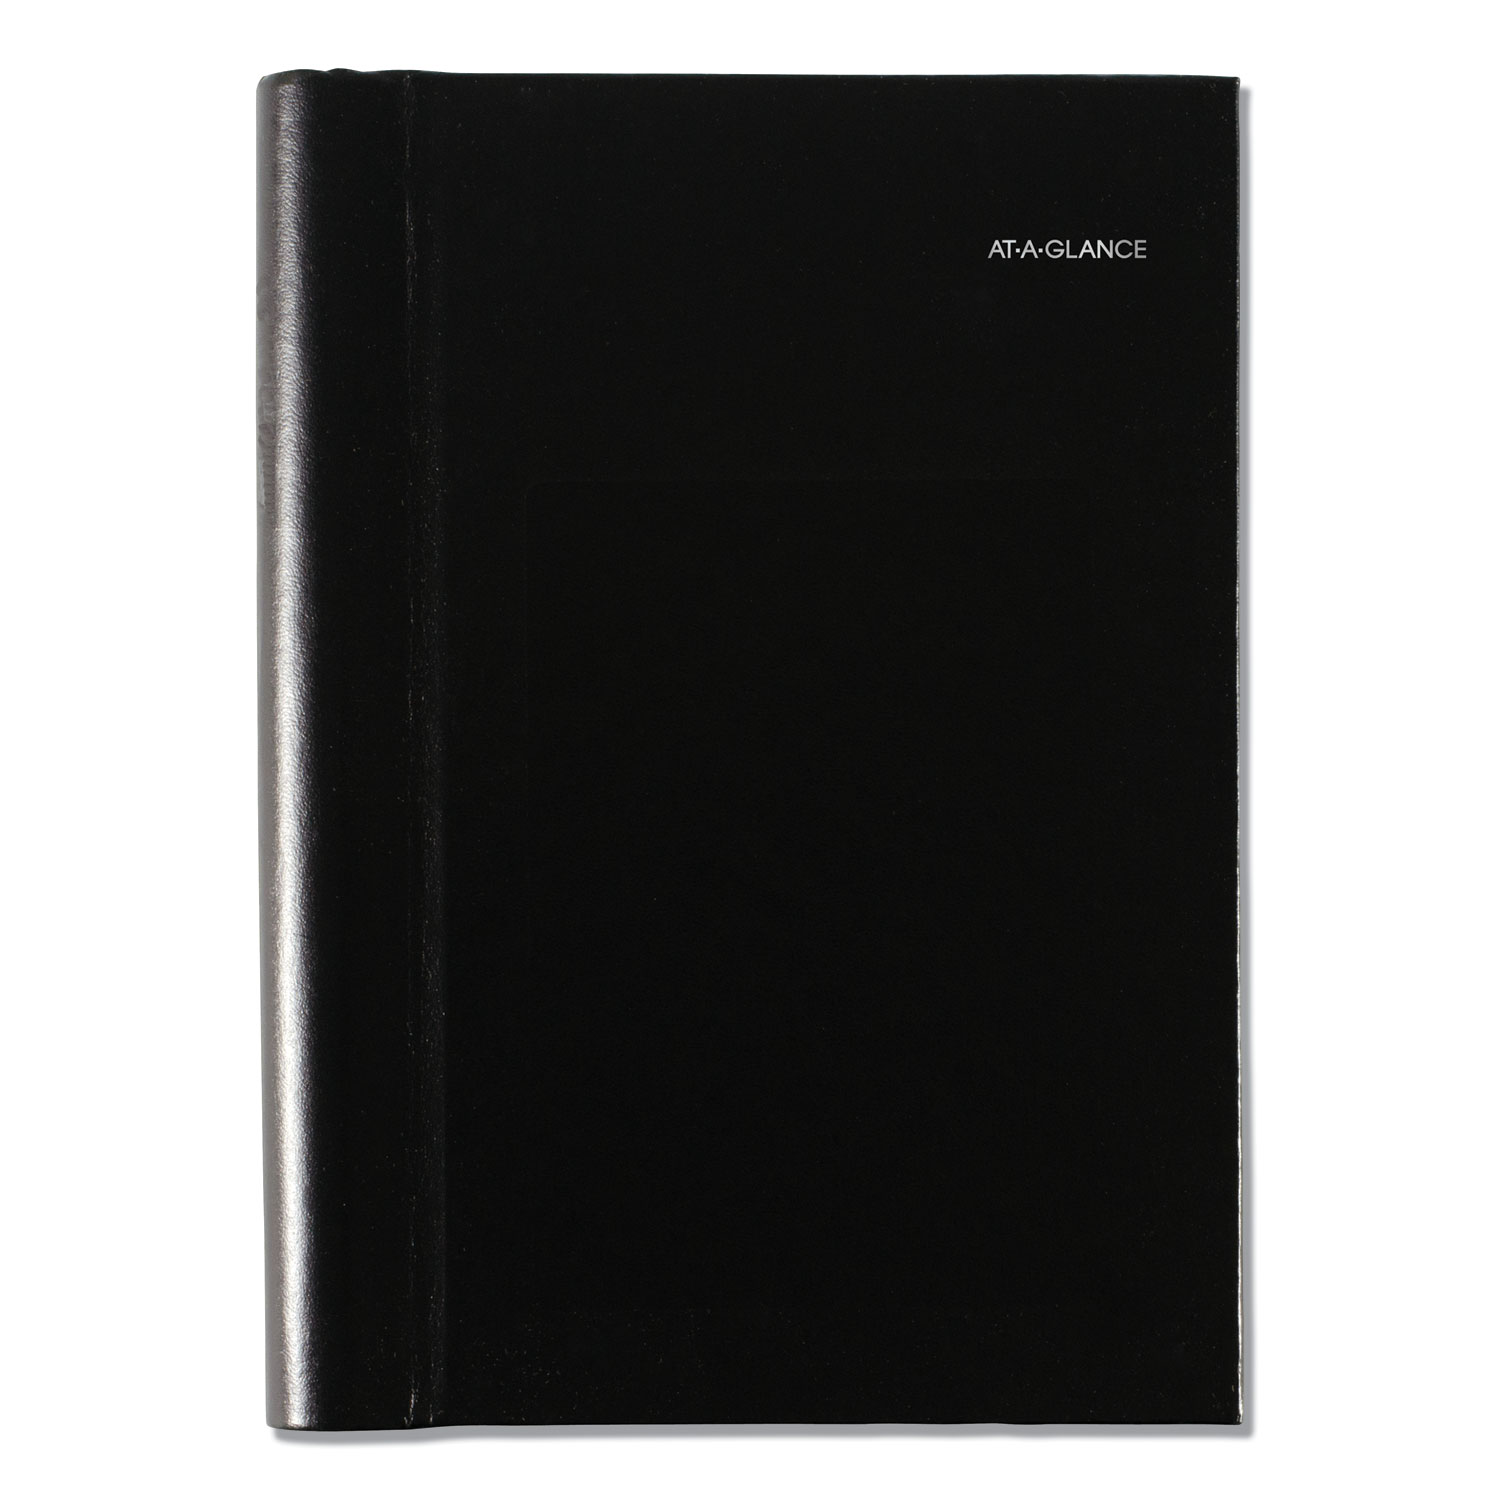  AT-A-GLANCE G100H00 Hardcover Daily Appointment Book, 7 7/8 x 4 7/8, Black, 2020 (AAGG100H00) 